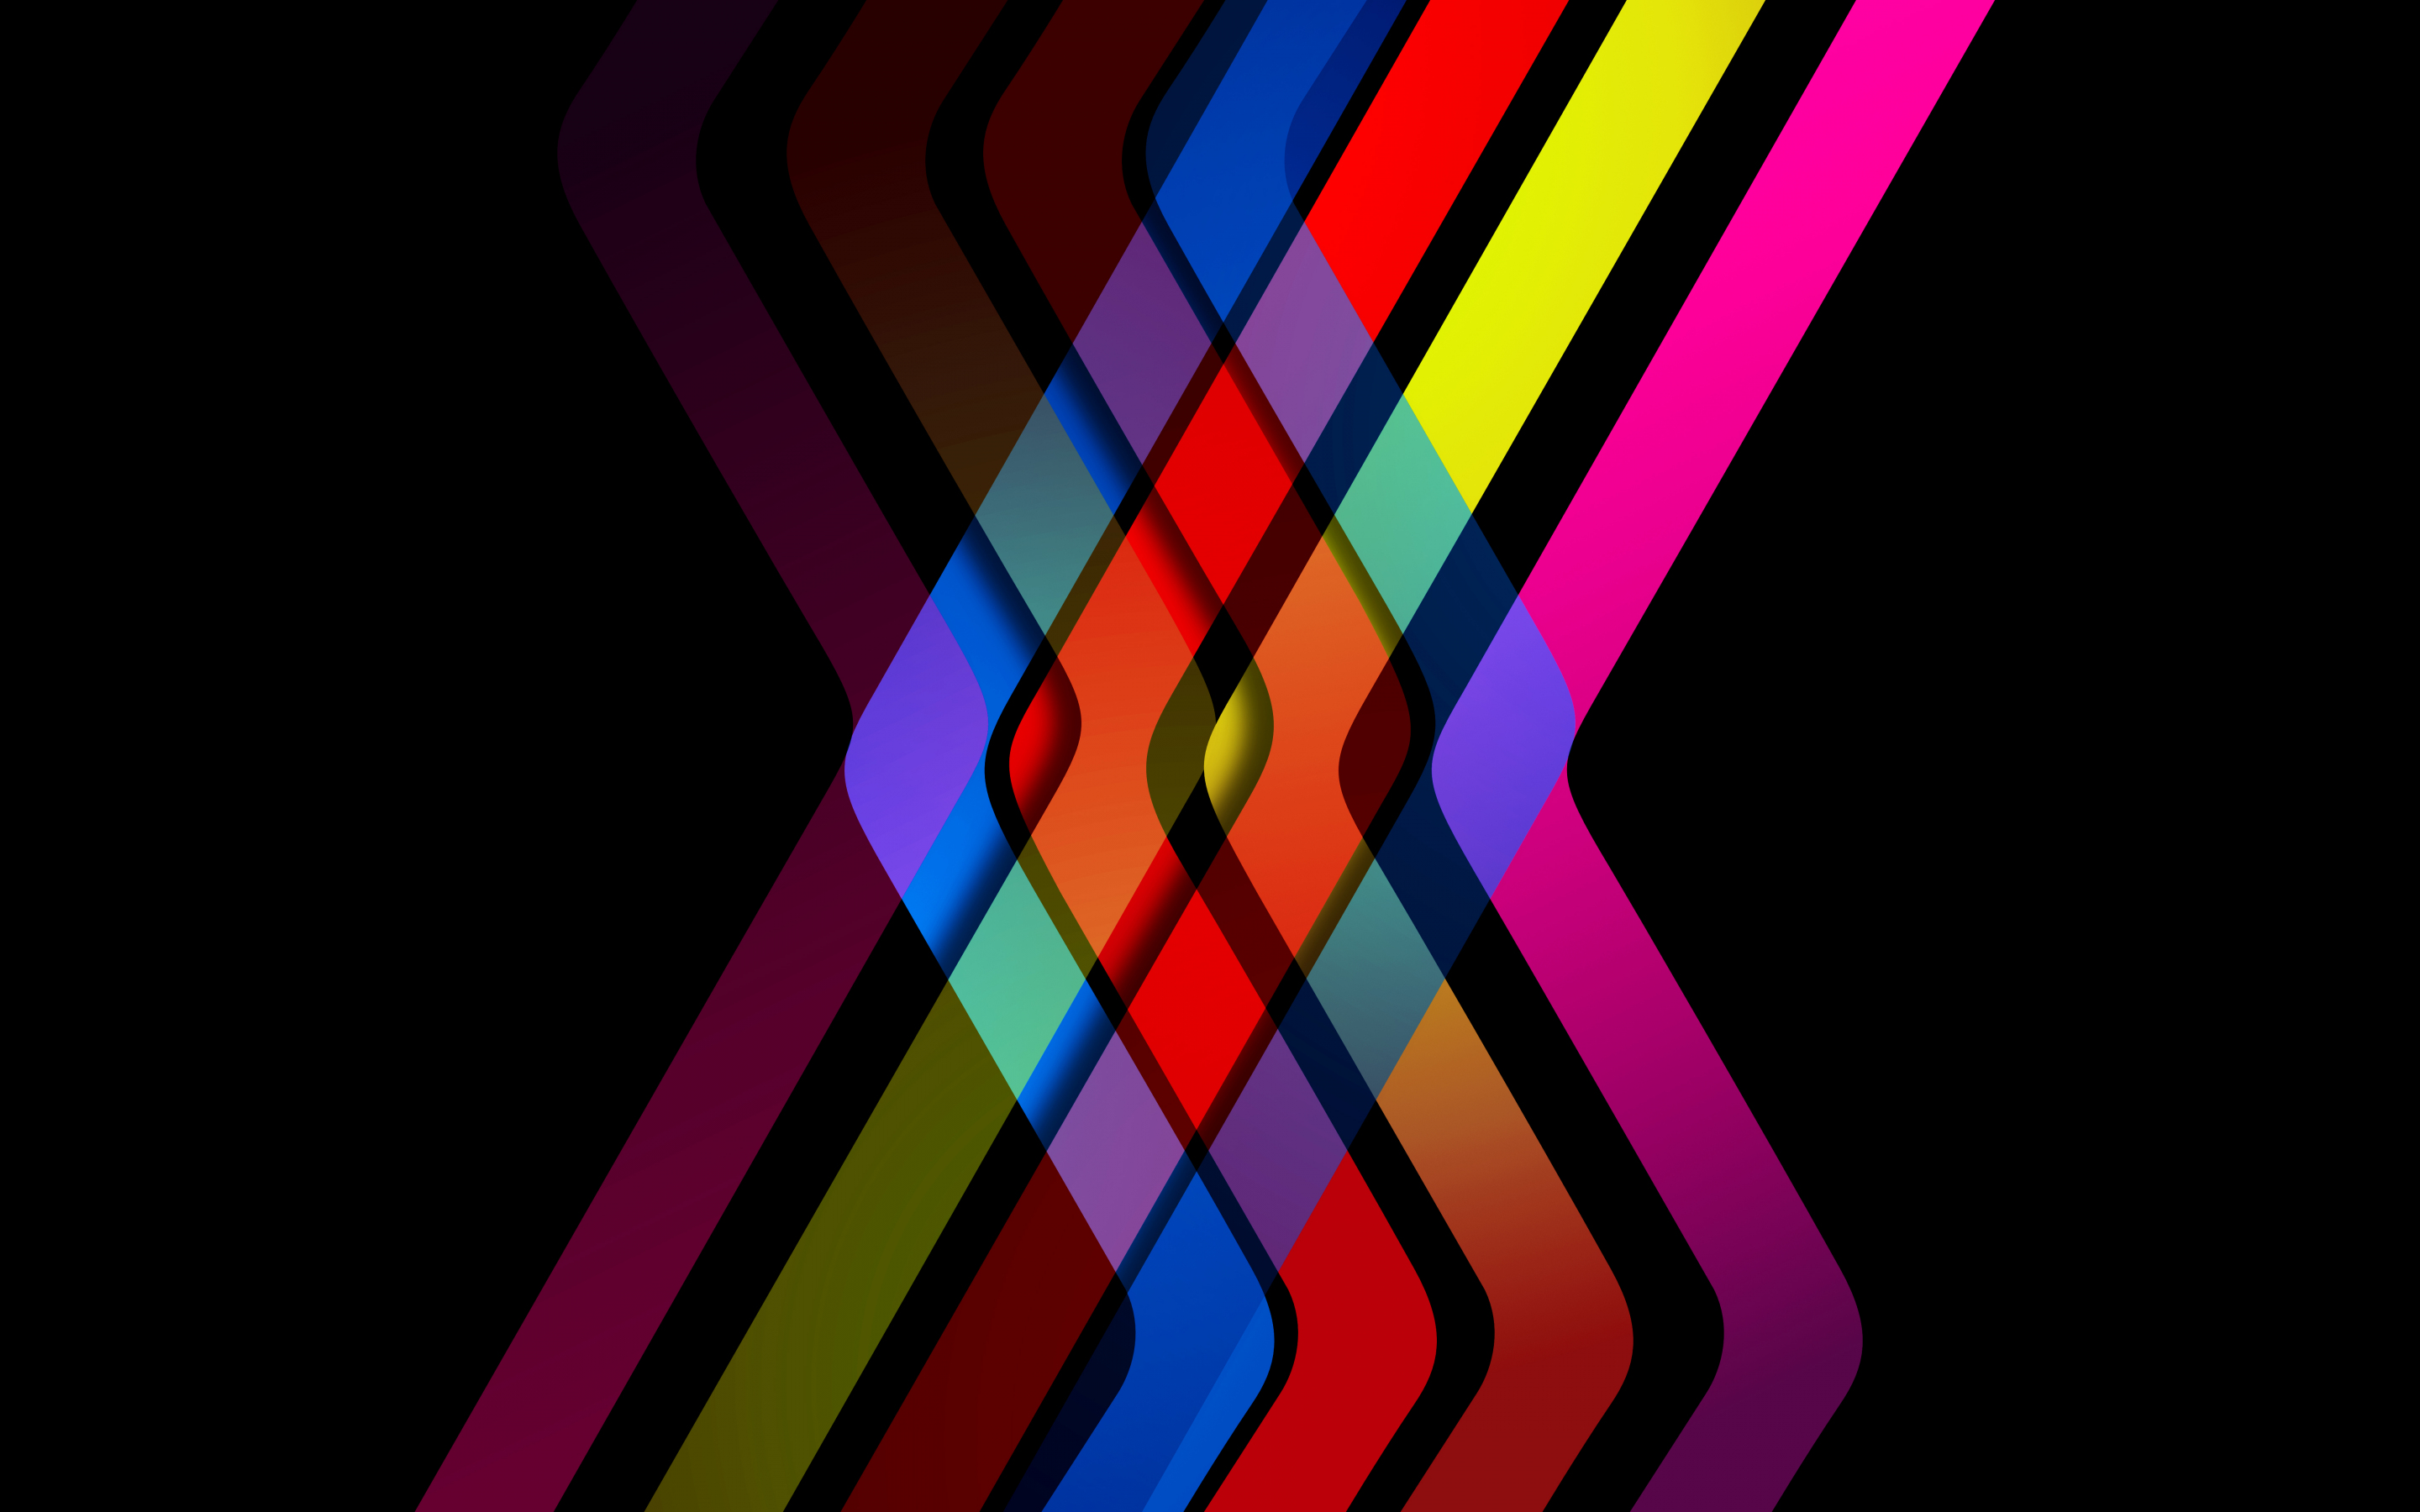 Lines-stripes intersection, abstract, colorful art, 2880x1800 wallpaper